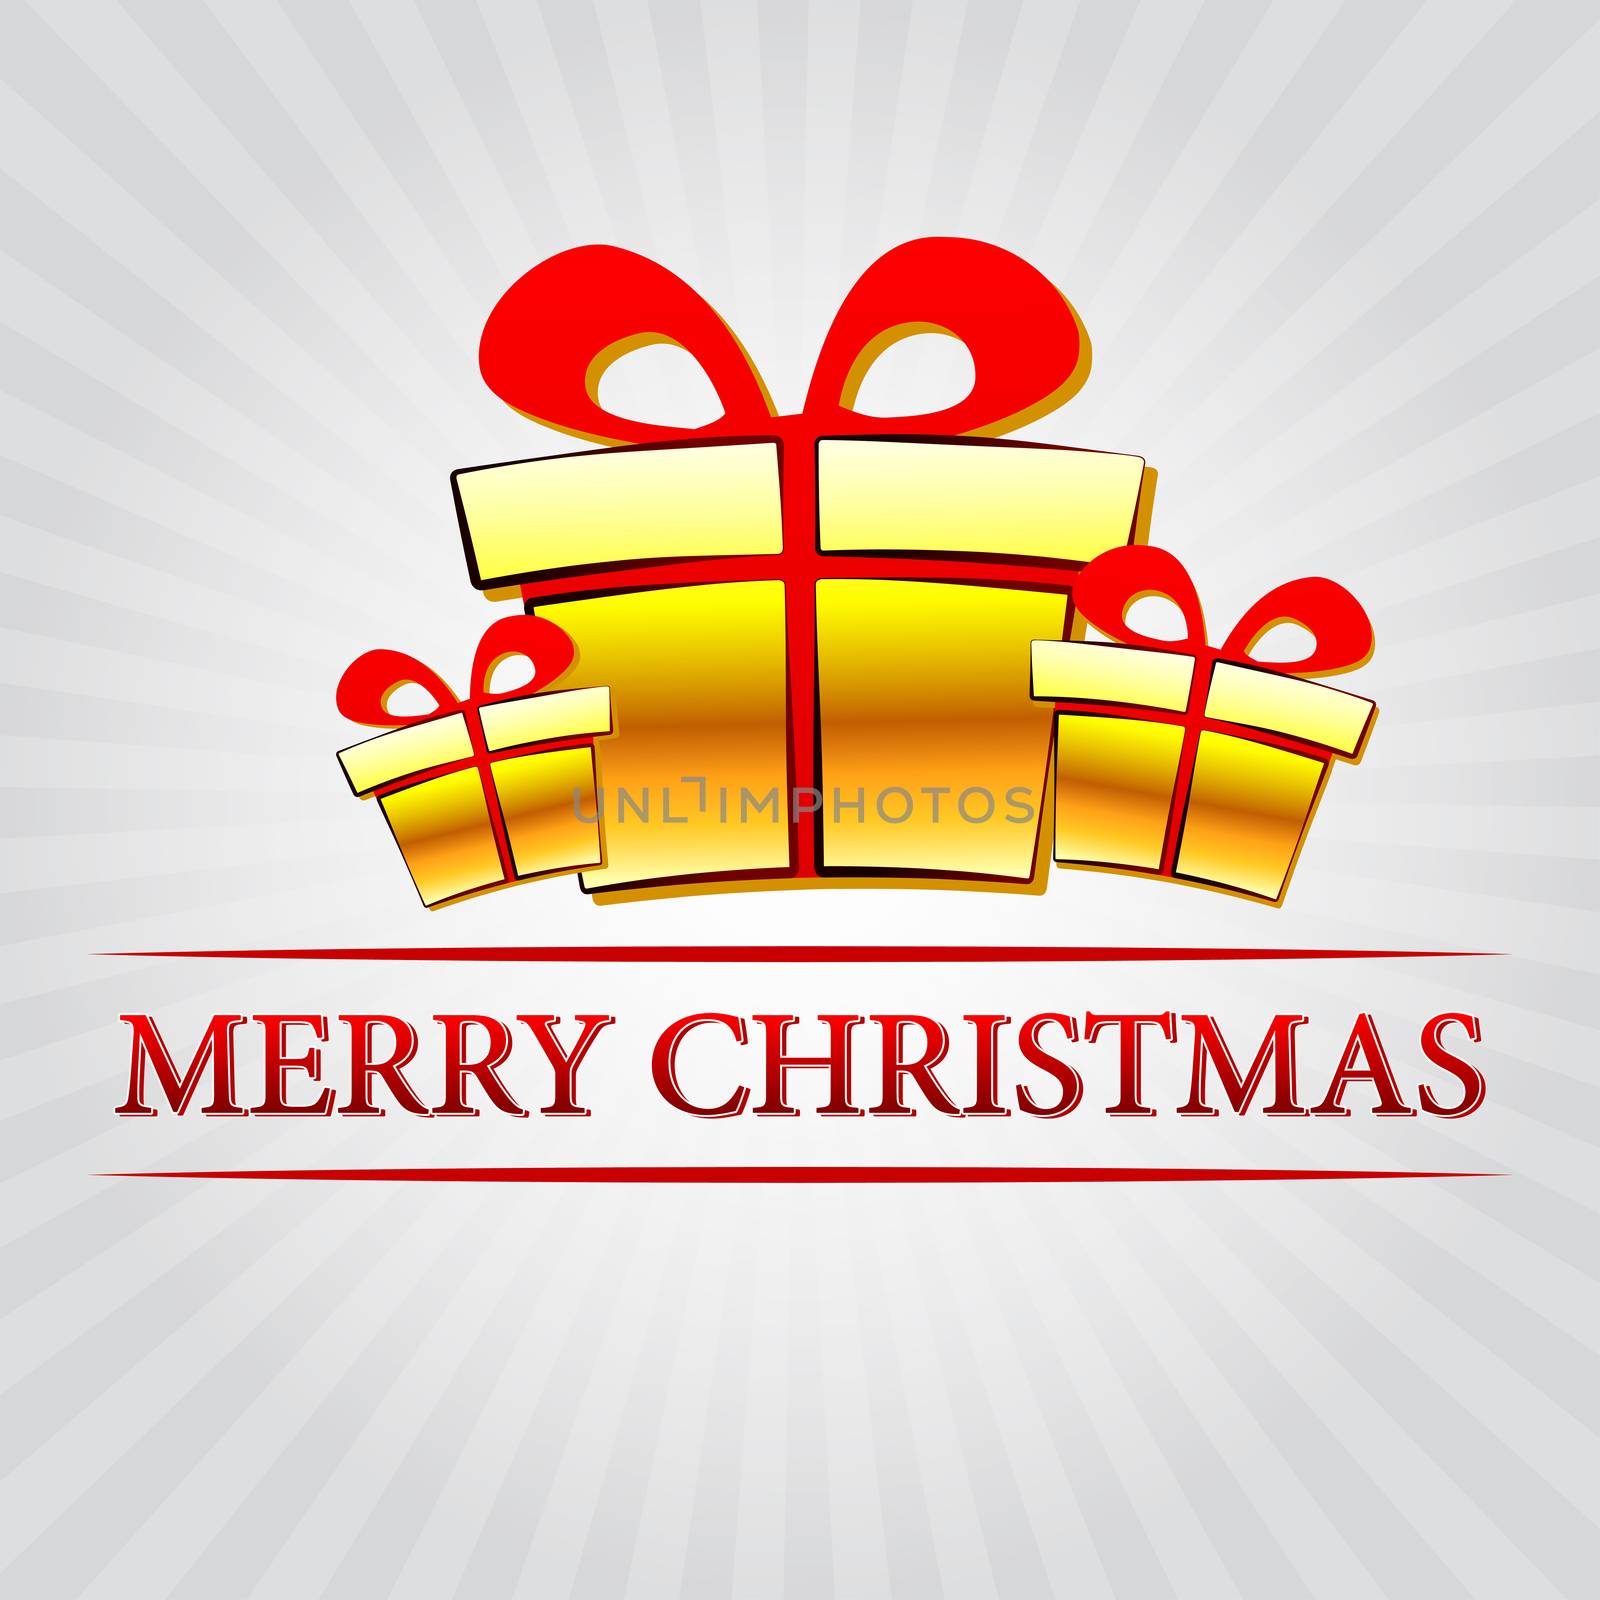 merry christmas - text with golden gift boxes signs over silver grey rays